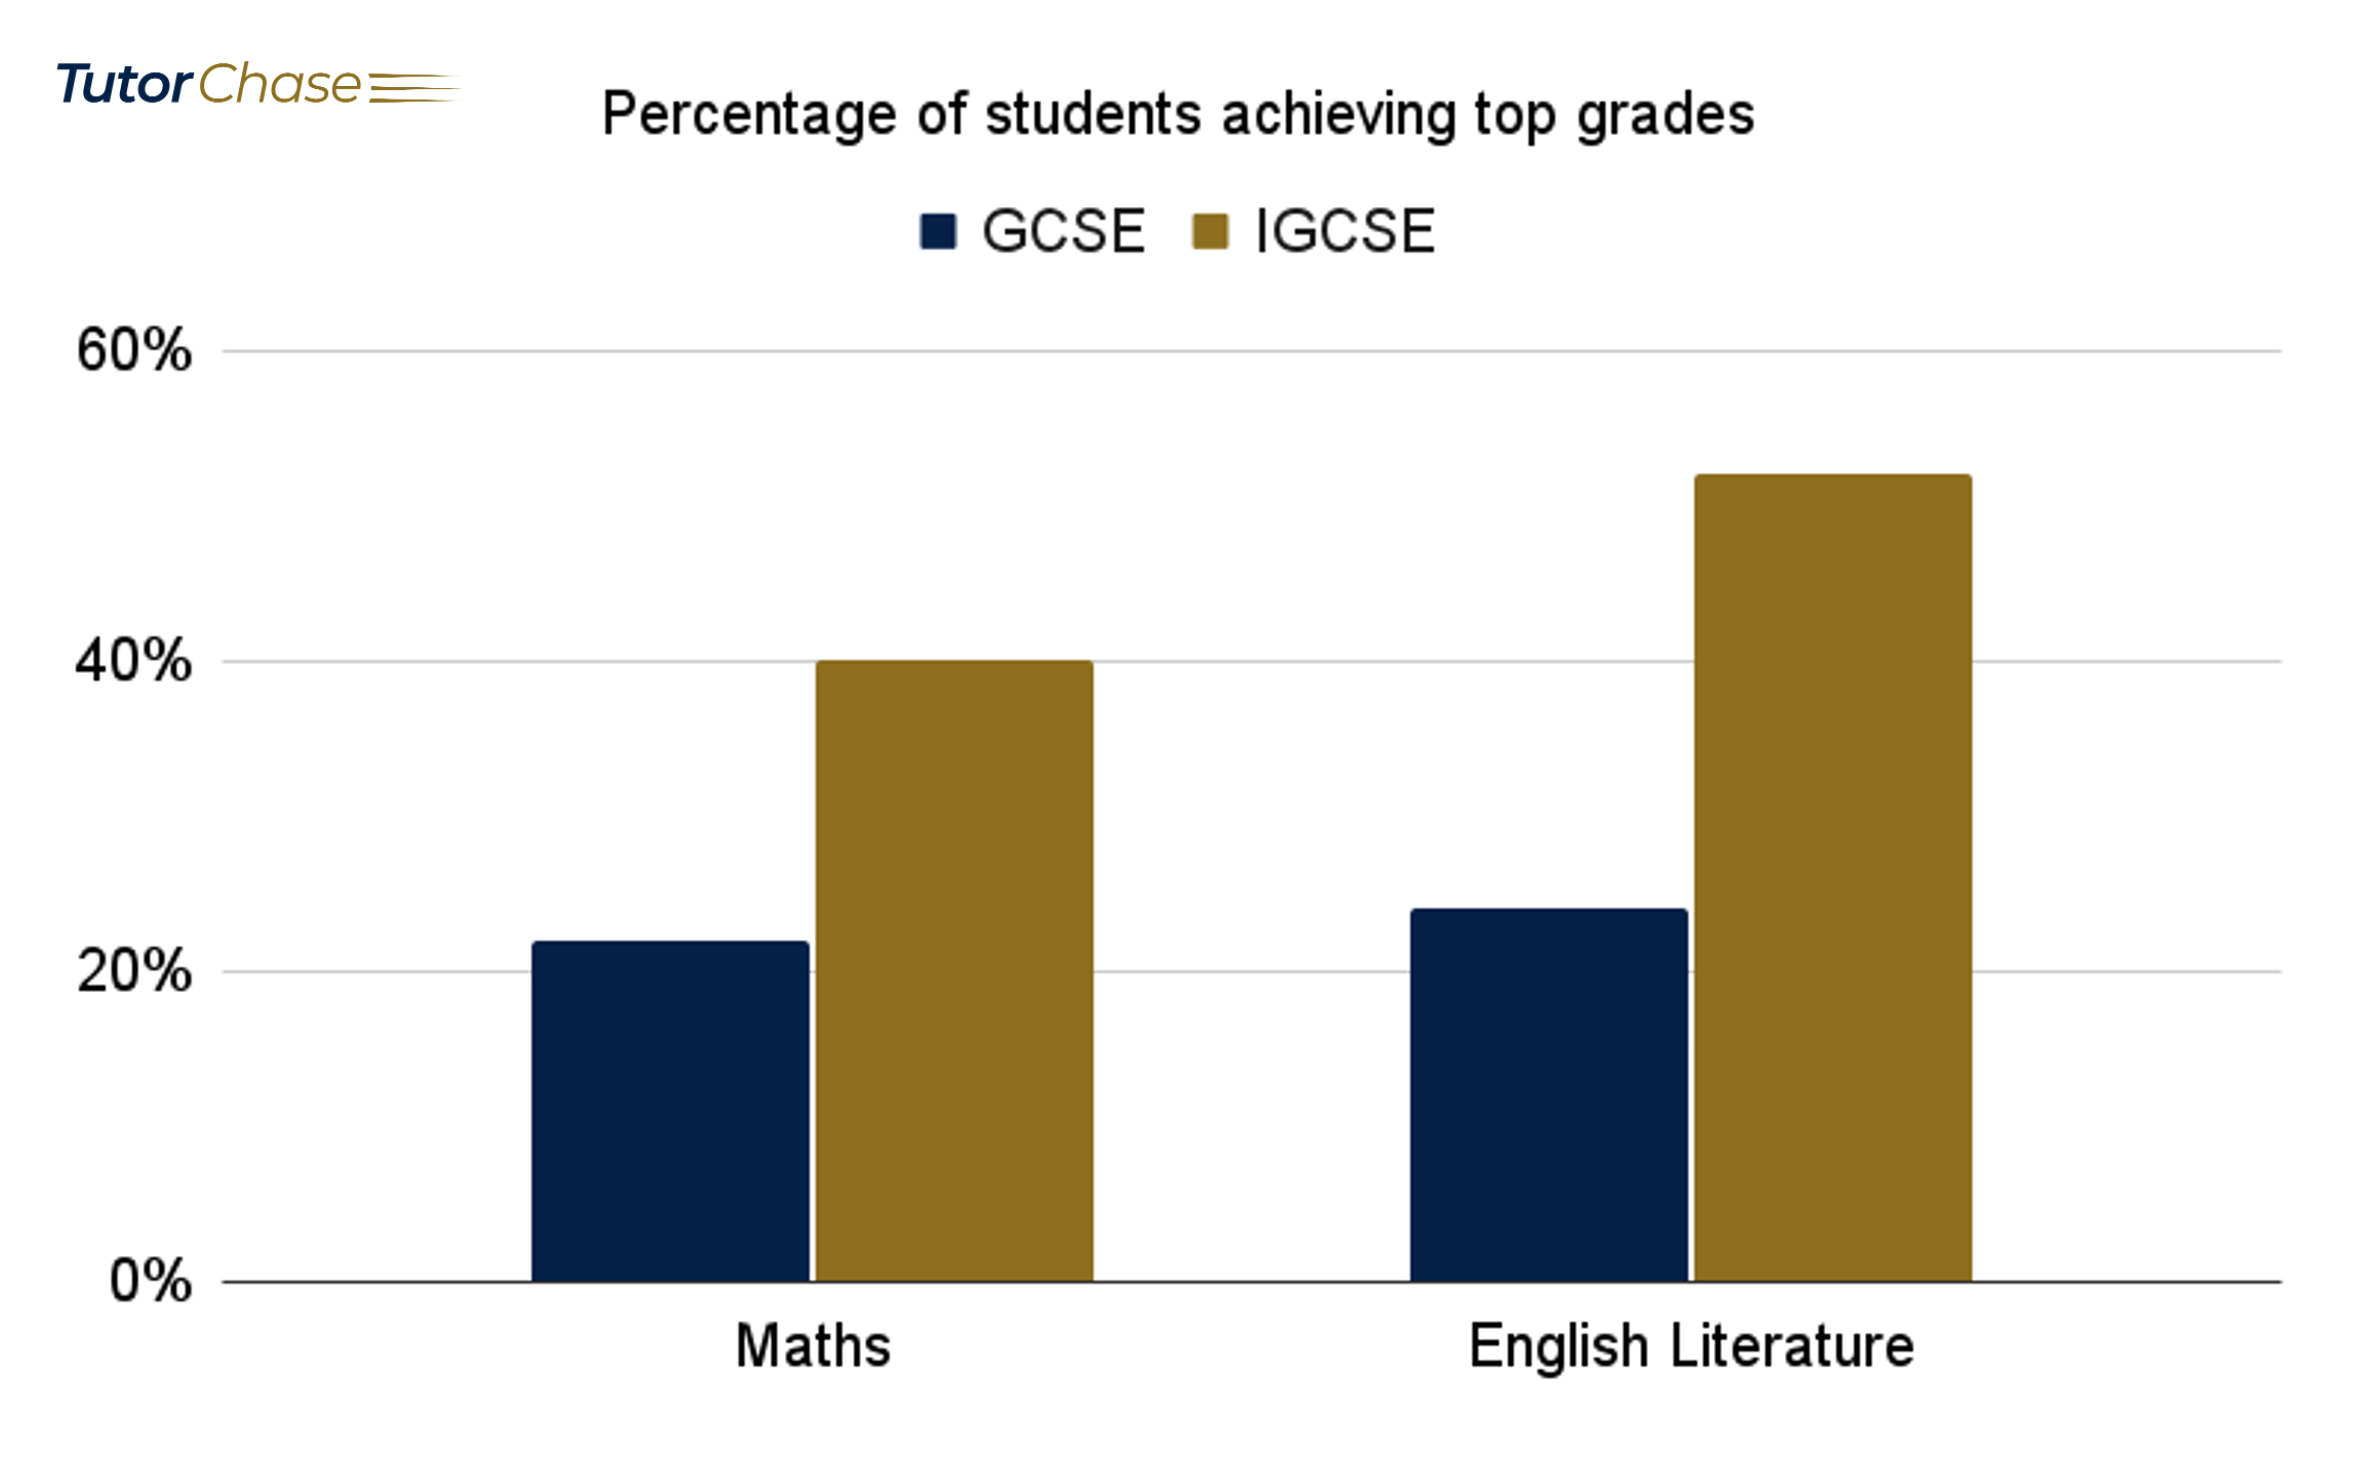 Percentage of students achieving top grades in GCSE and IGCSE Maths and English Literature in 2022